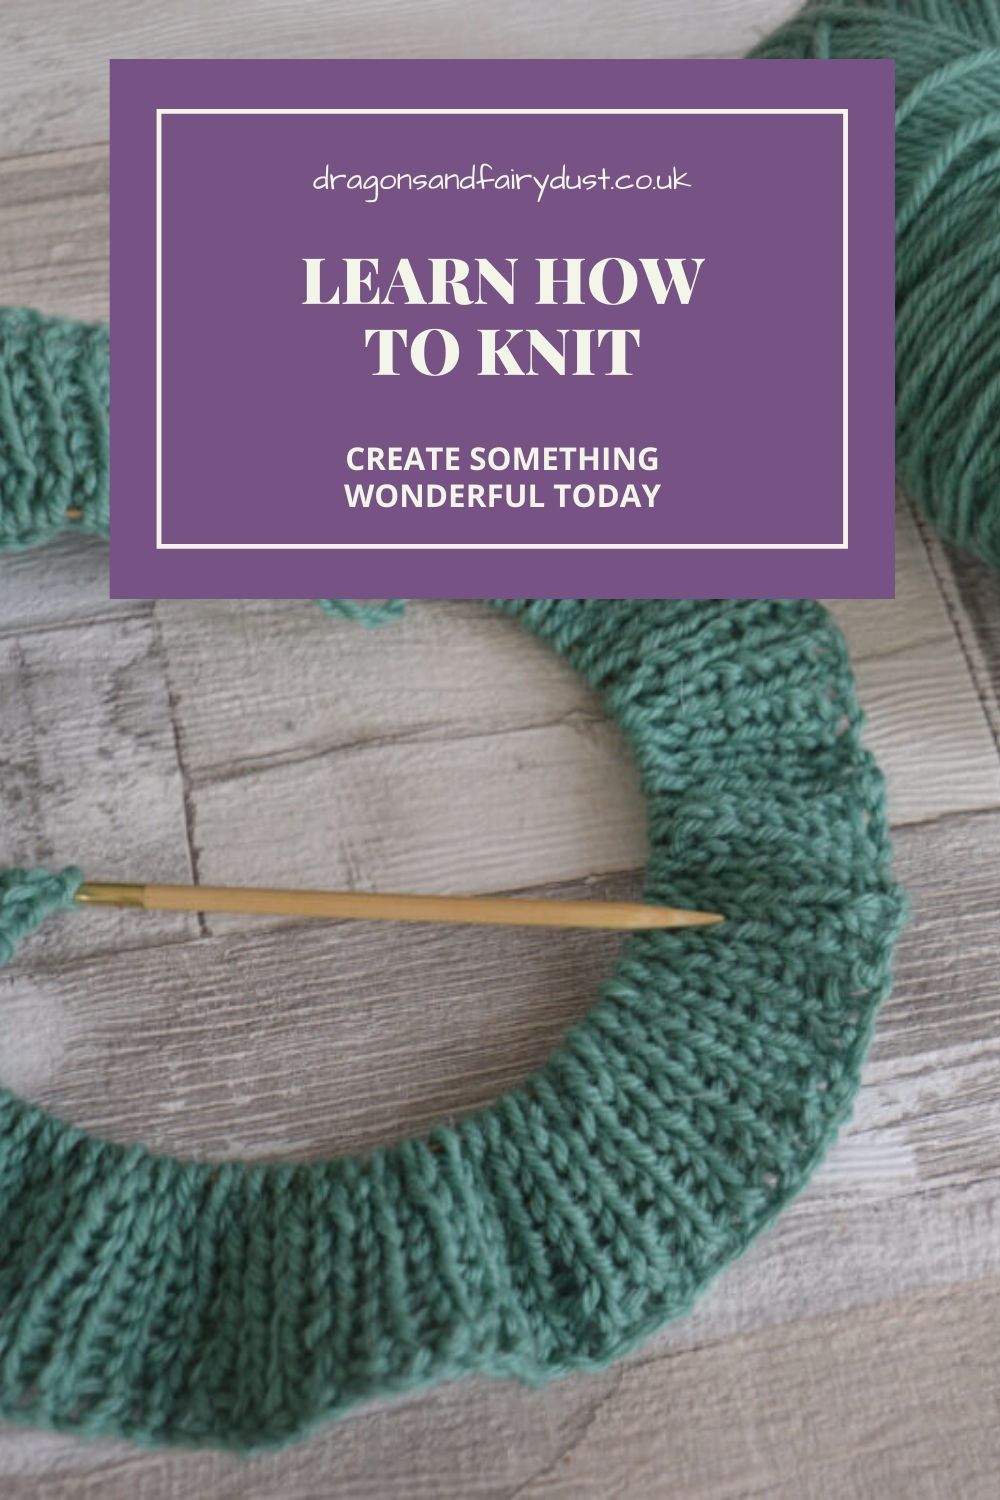 Why not learn how to knit and create something for yourself?